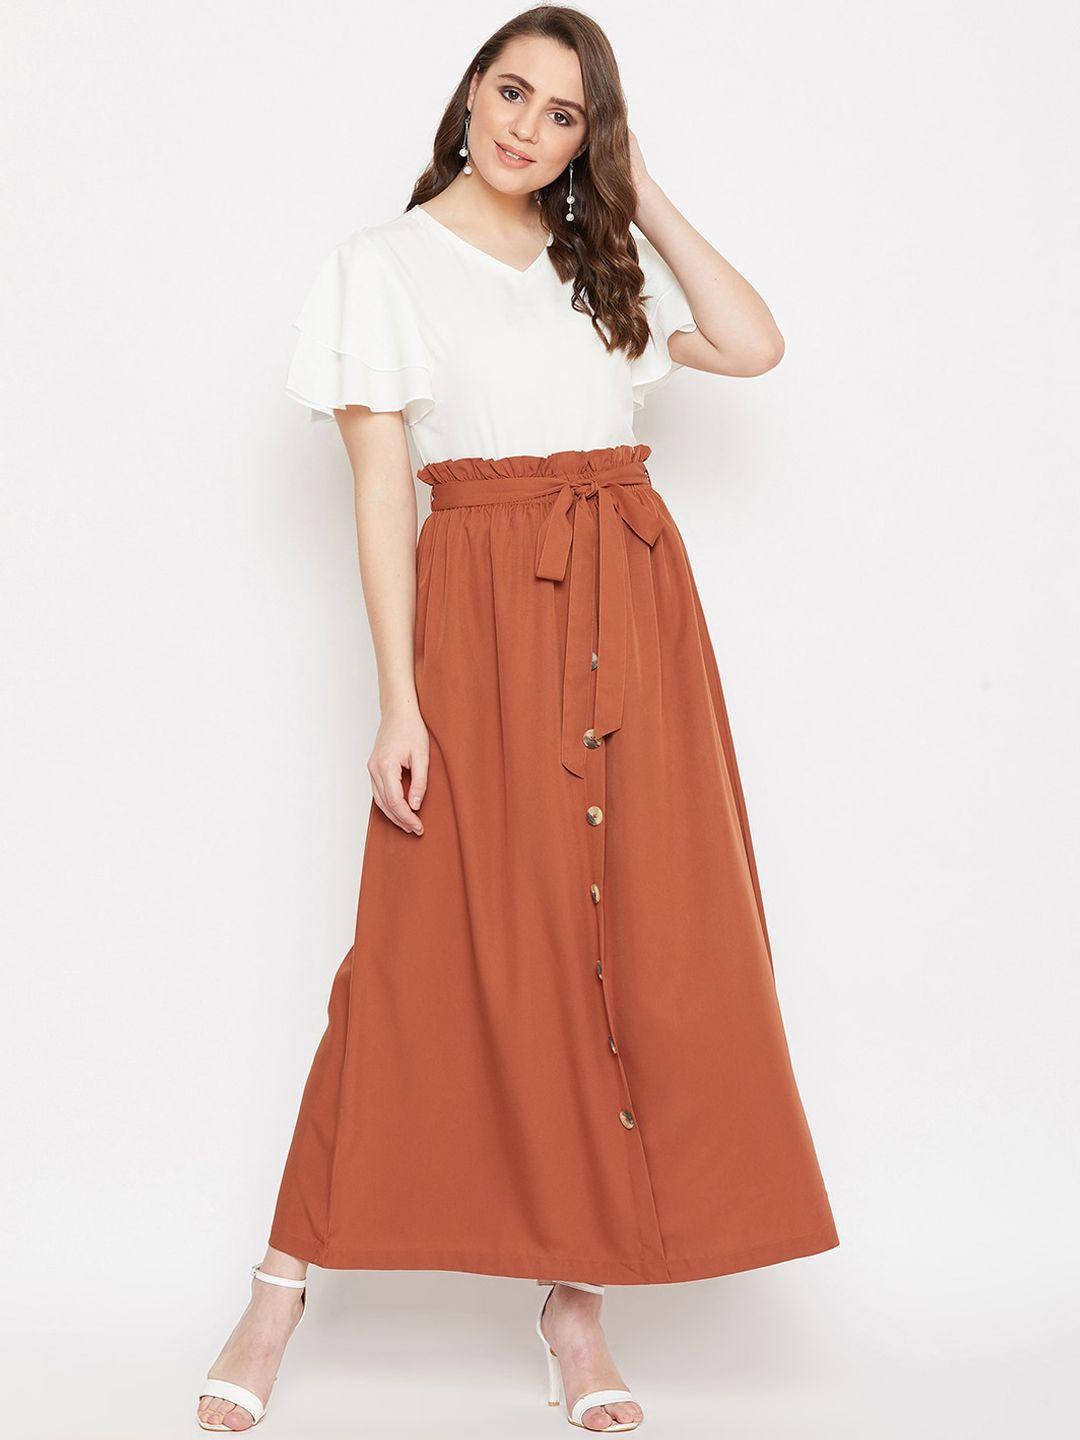 bitterlime women off-white & brown solid top with skirt